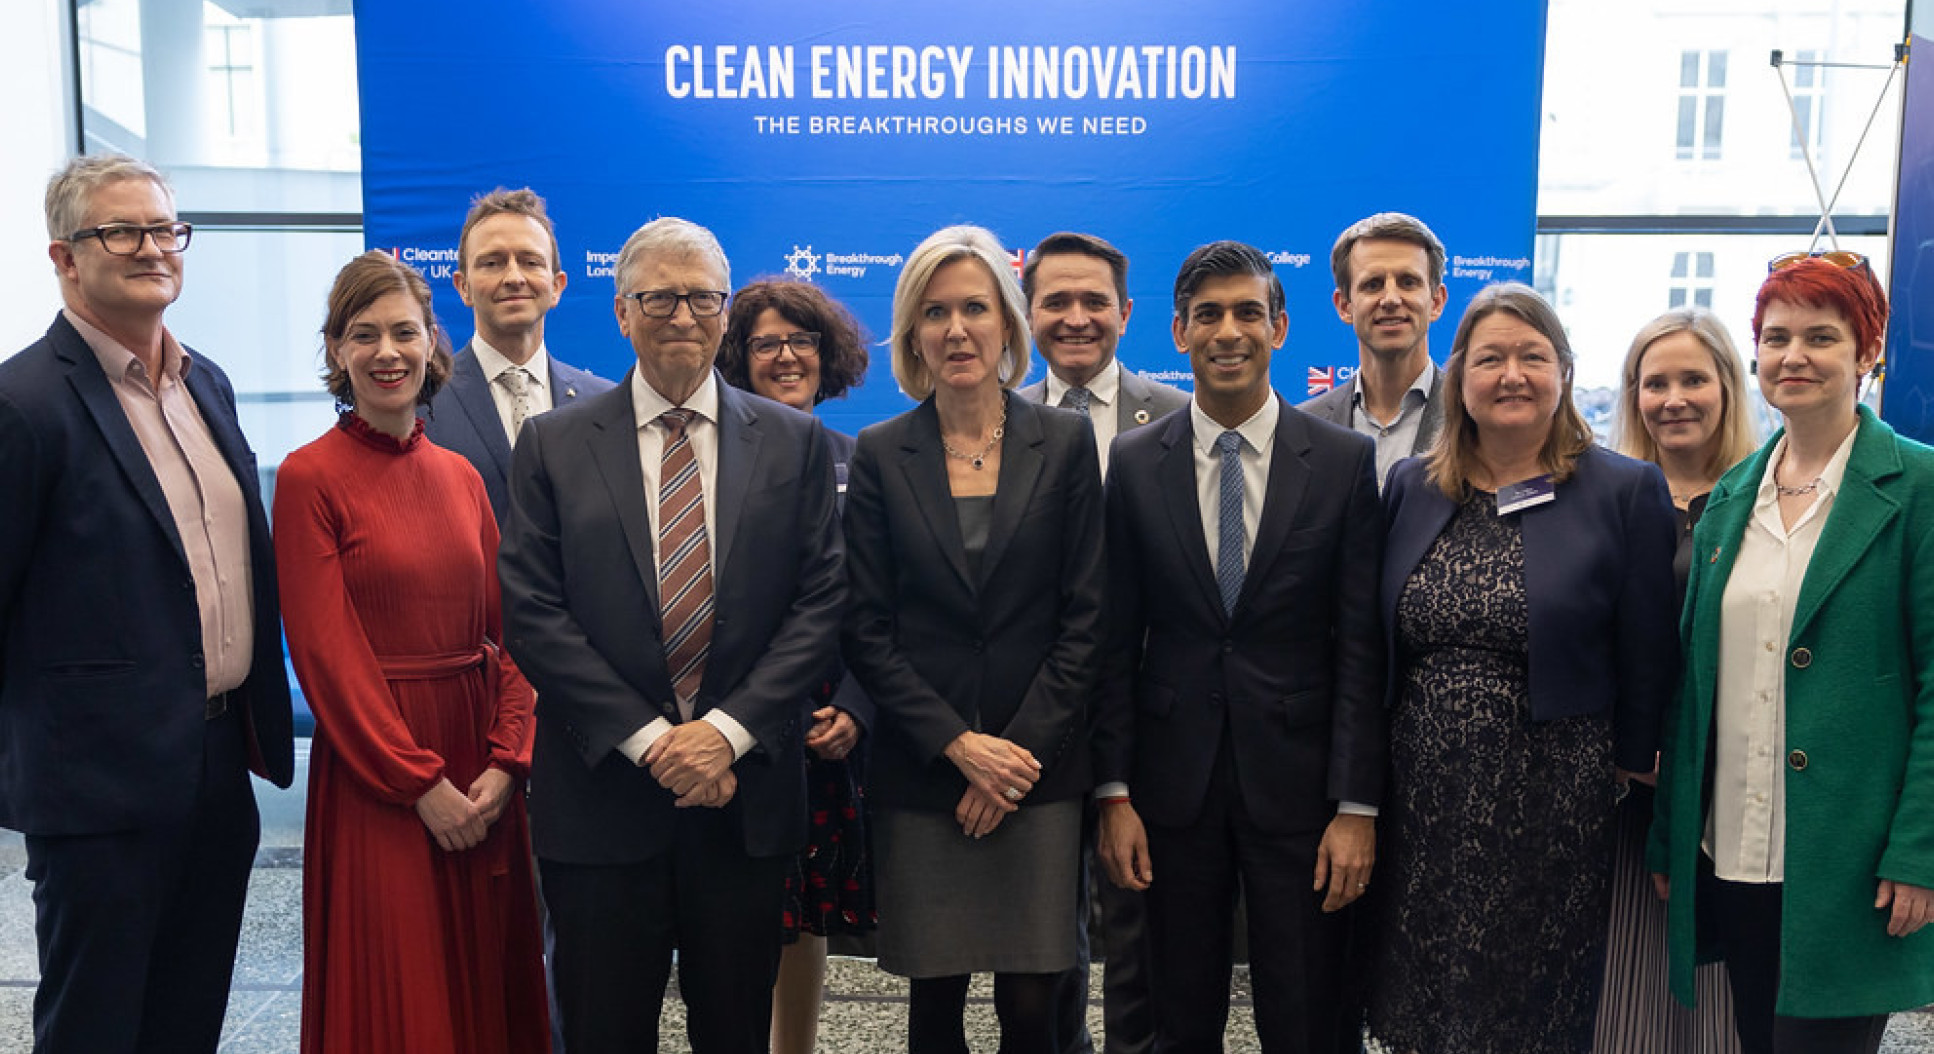 A group of people in front of a sign about clean energy innovation